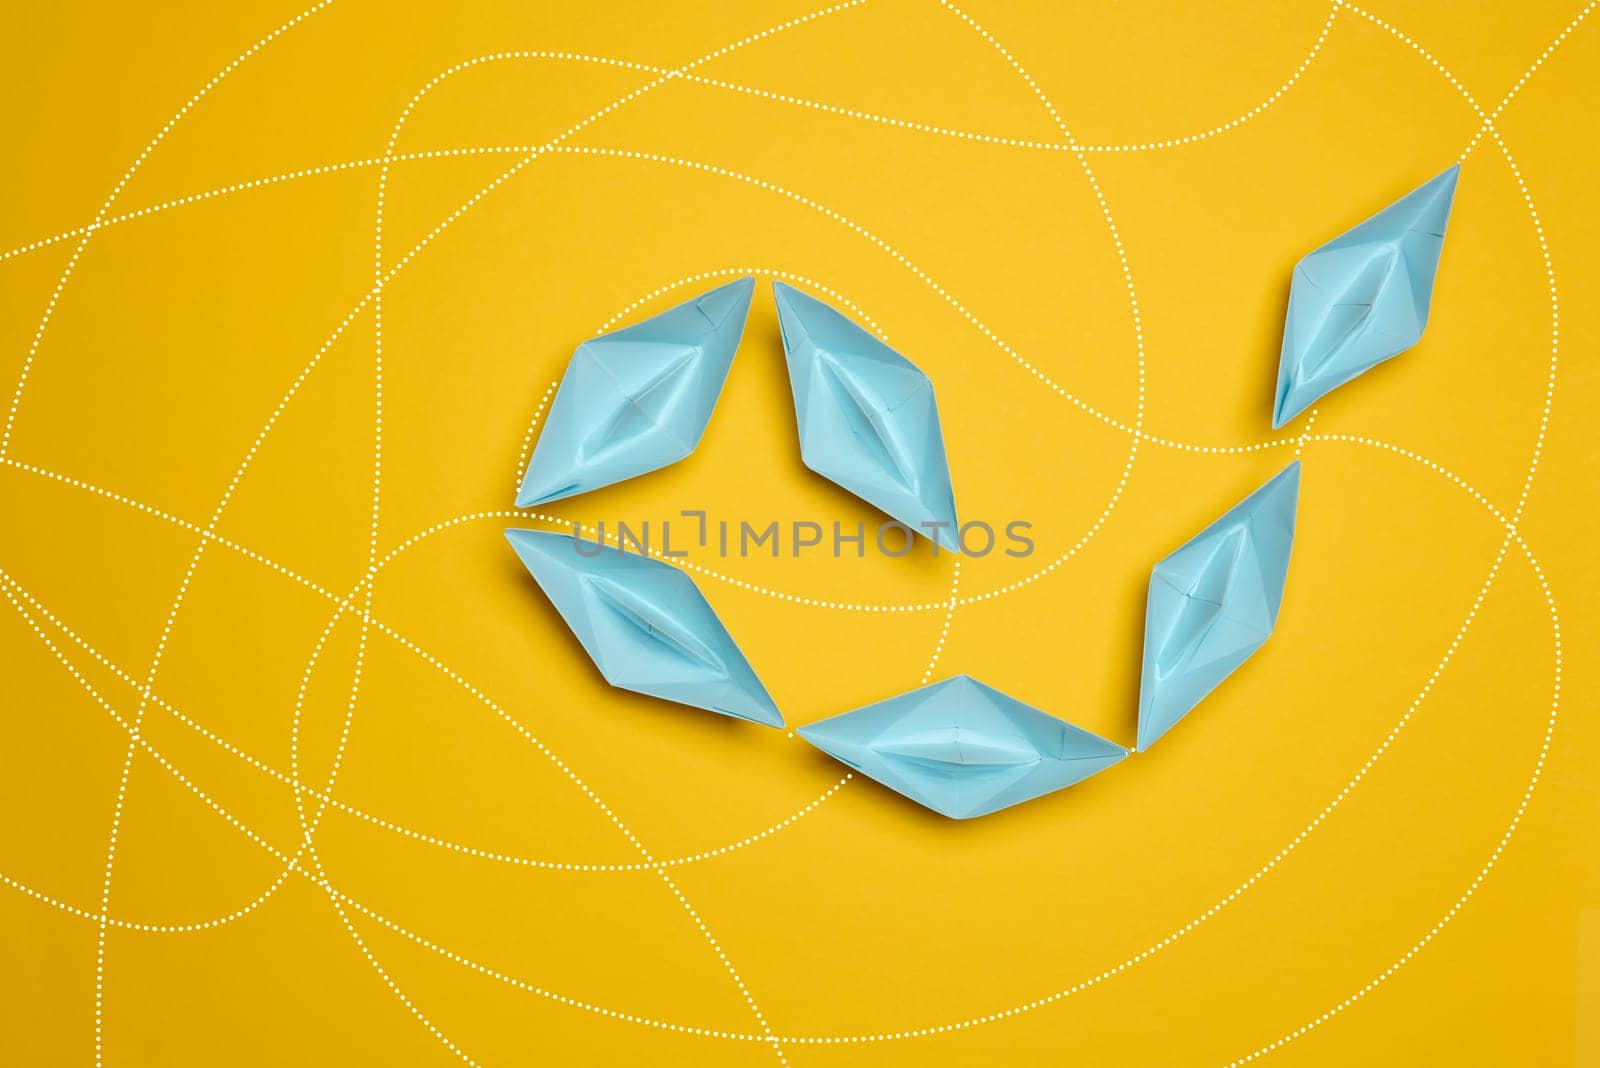 Blue paper boats move one after another on a yellow background, top view